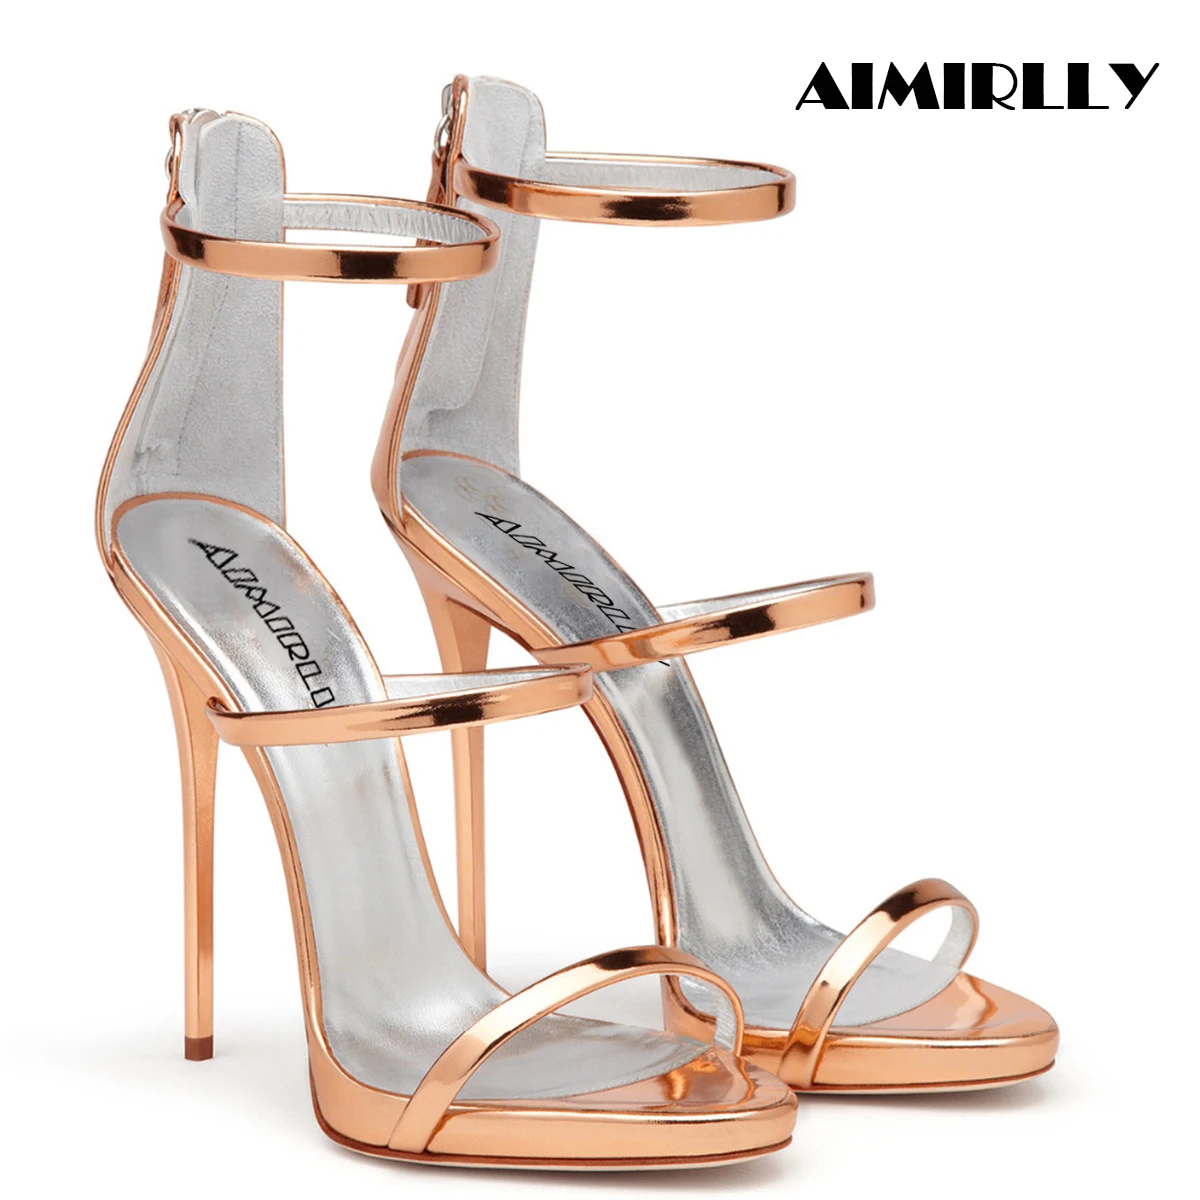 

Summer Shoes Women Peep Toe High Heels Sandals Elegant Strappy Cover Heel Back Zipper Ladies Party Wedding Shoes Aimirlly